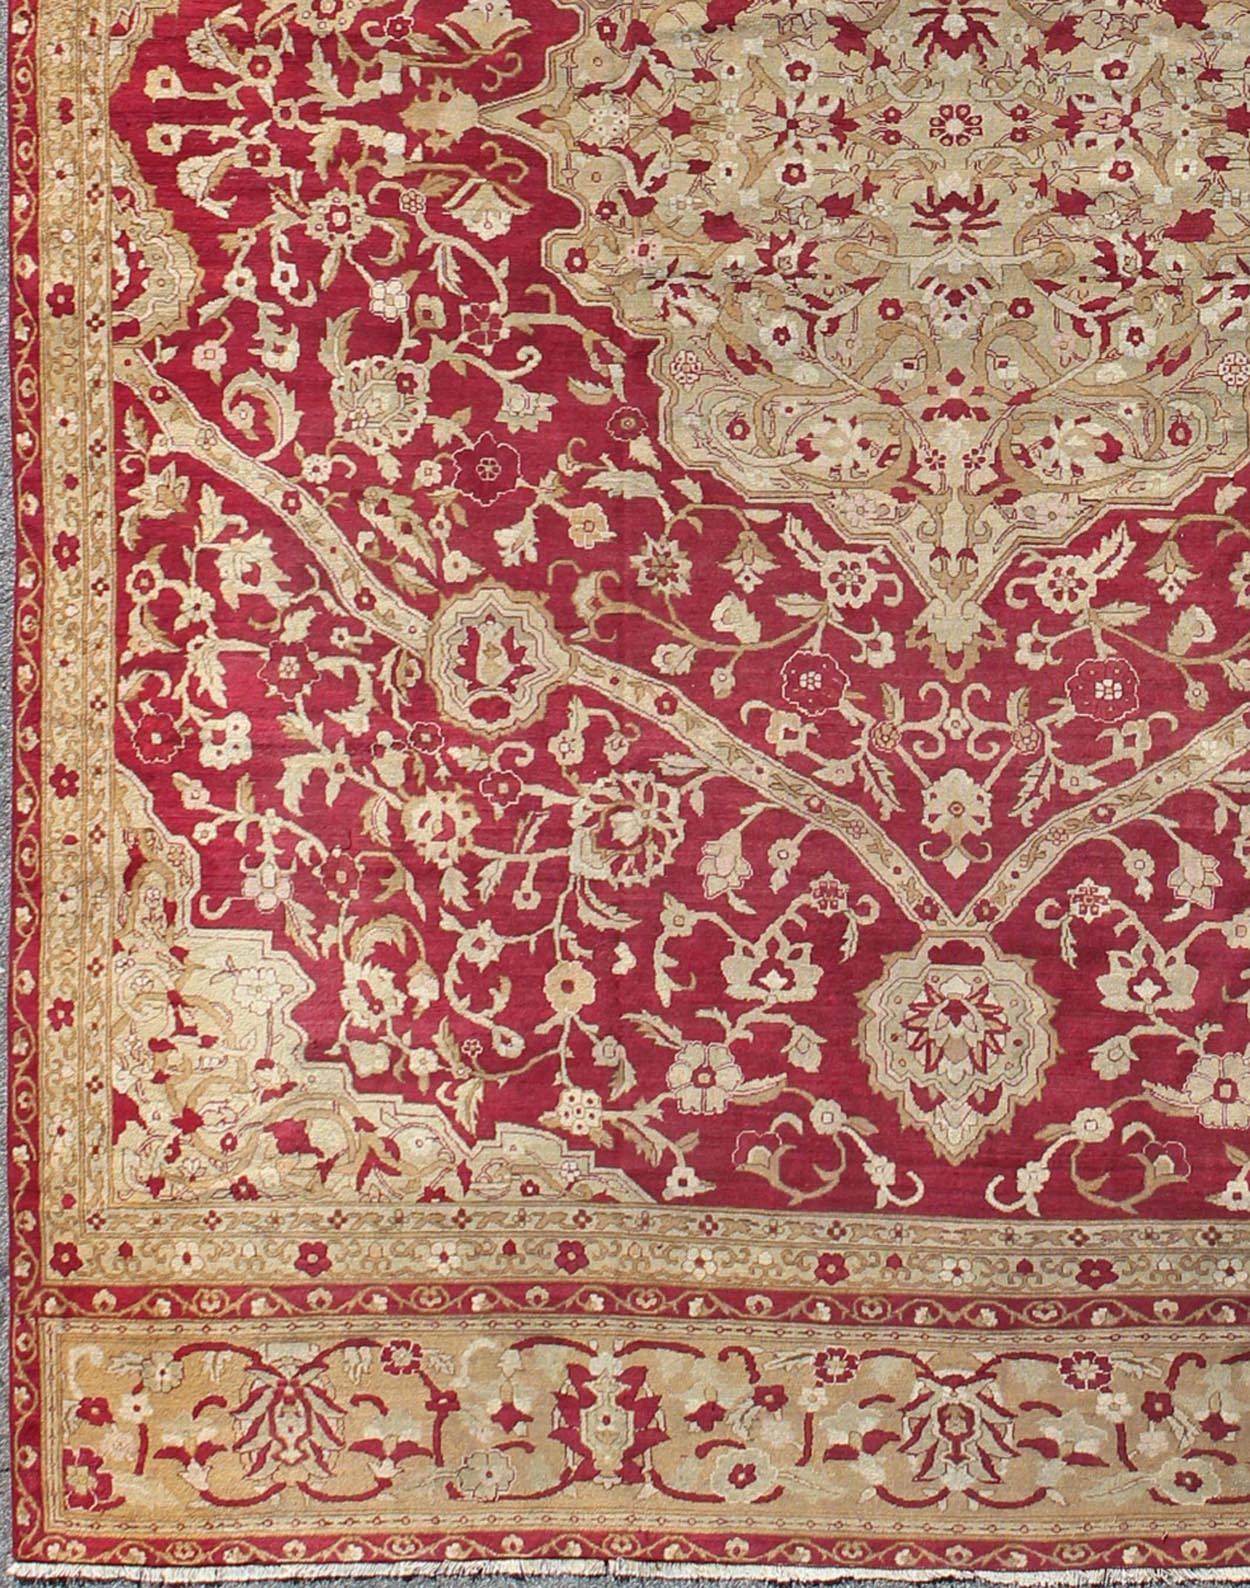 Large Antique Agra Carpet with Floral Design. Keivan Woven Arts / rug /13-0603, country of origin / type: Iran / Sultanabad , circa 1890. 

Measures: 13' x 18'

Large elegant Antique Agra Carpet with Floral Design in Tones of Red, taupe and light